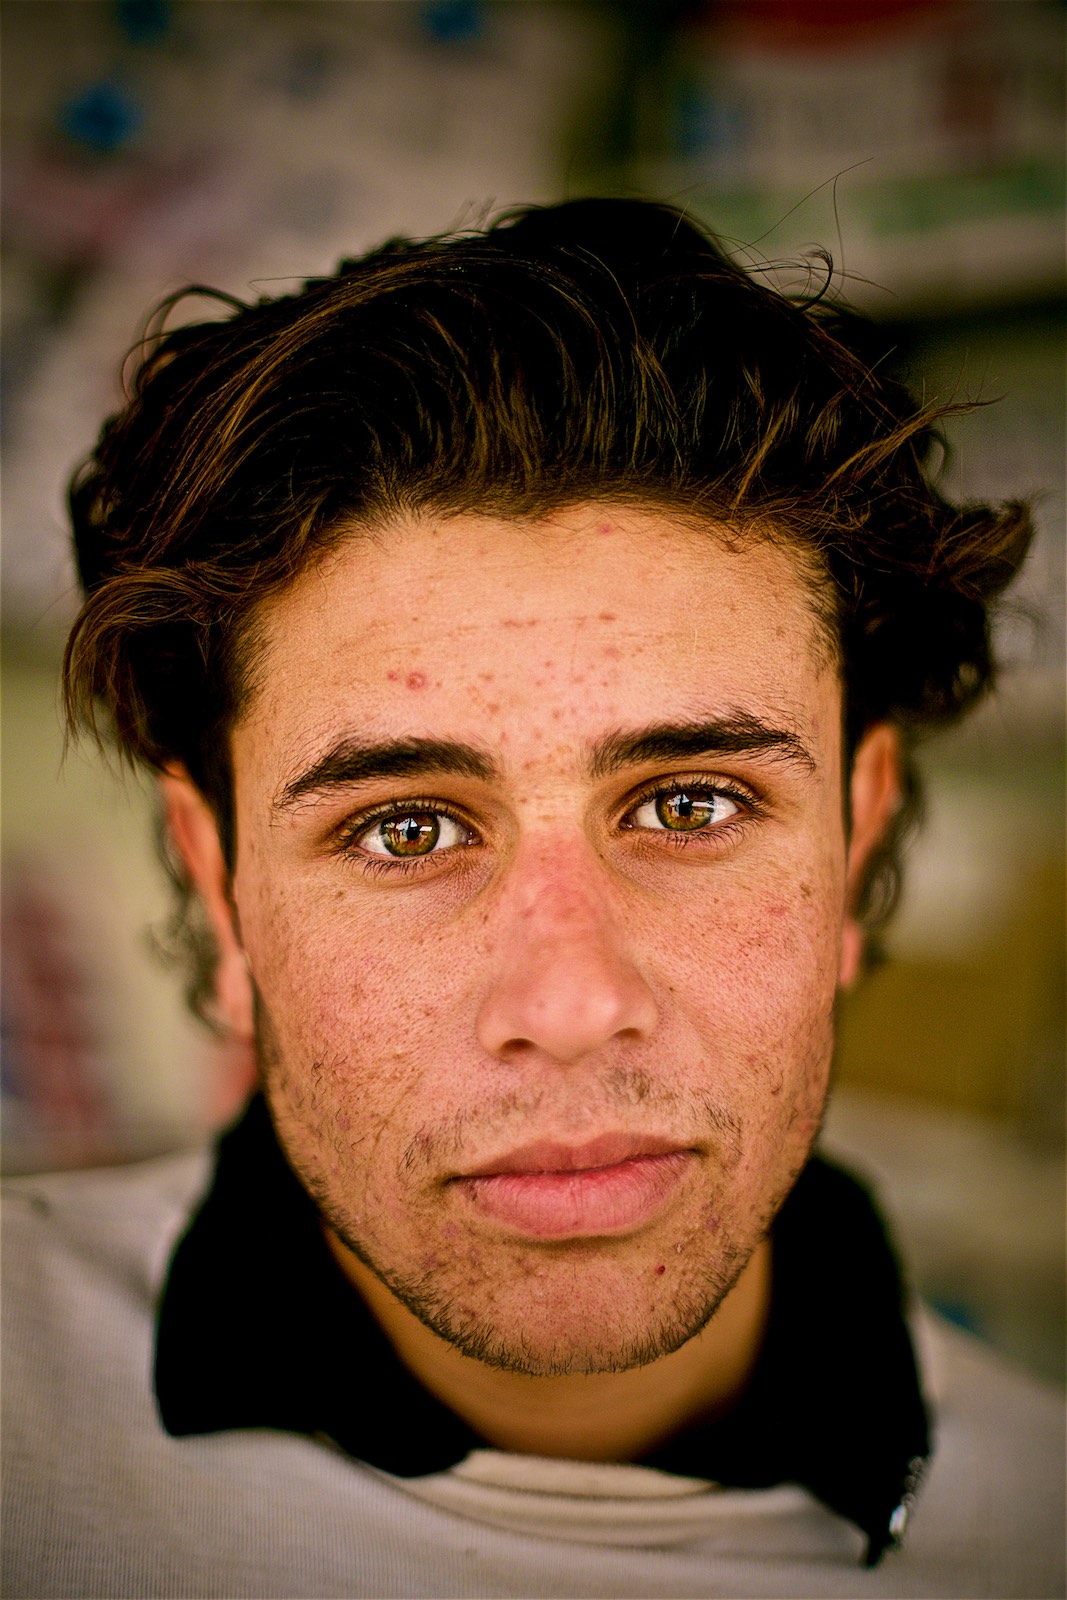  Majd says that the constant dust-storms and lack of proper structure for hygiene (lack of running water, for example), makes everyone sick for prolonged periods of time here. He especially loathes the acne that developed on his face after his arriva